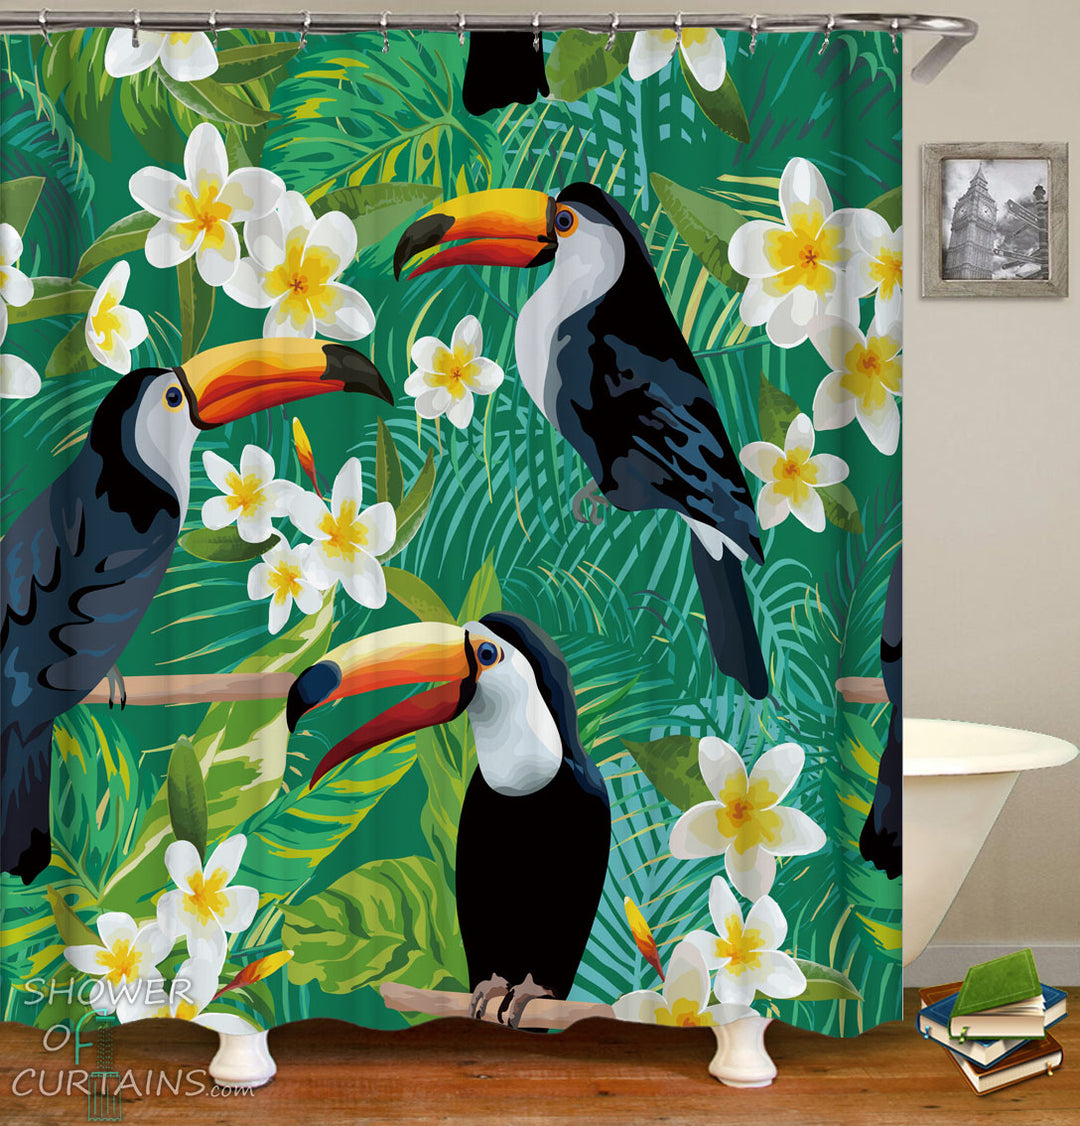 Tropcial Shower Curtains - Toucans Fit Plumerias Over The Green